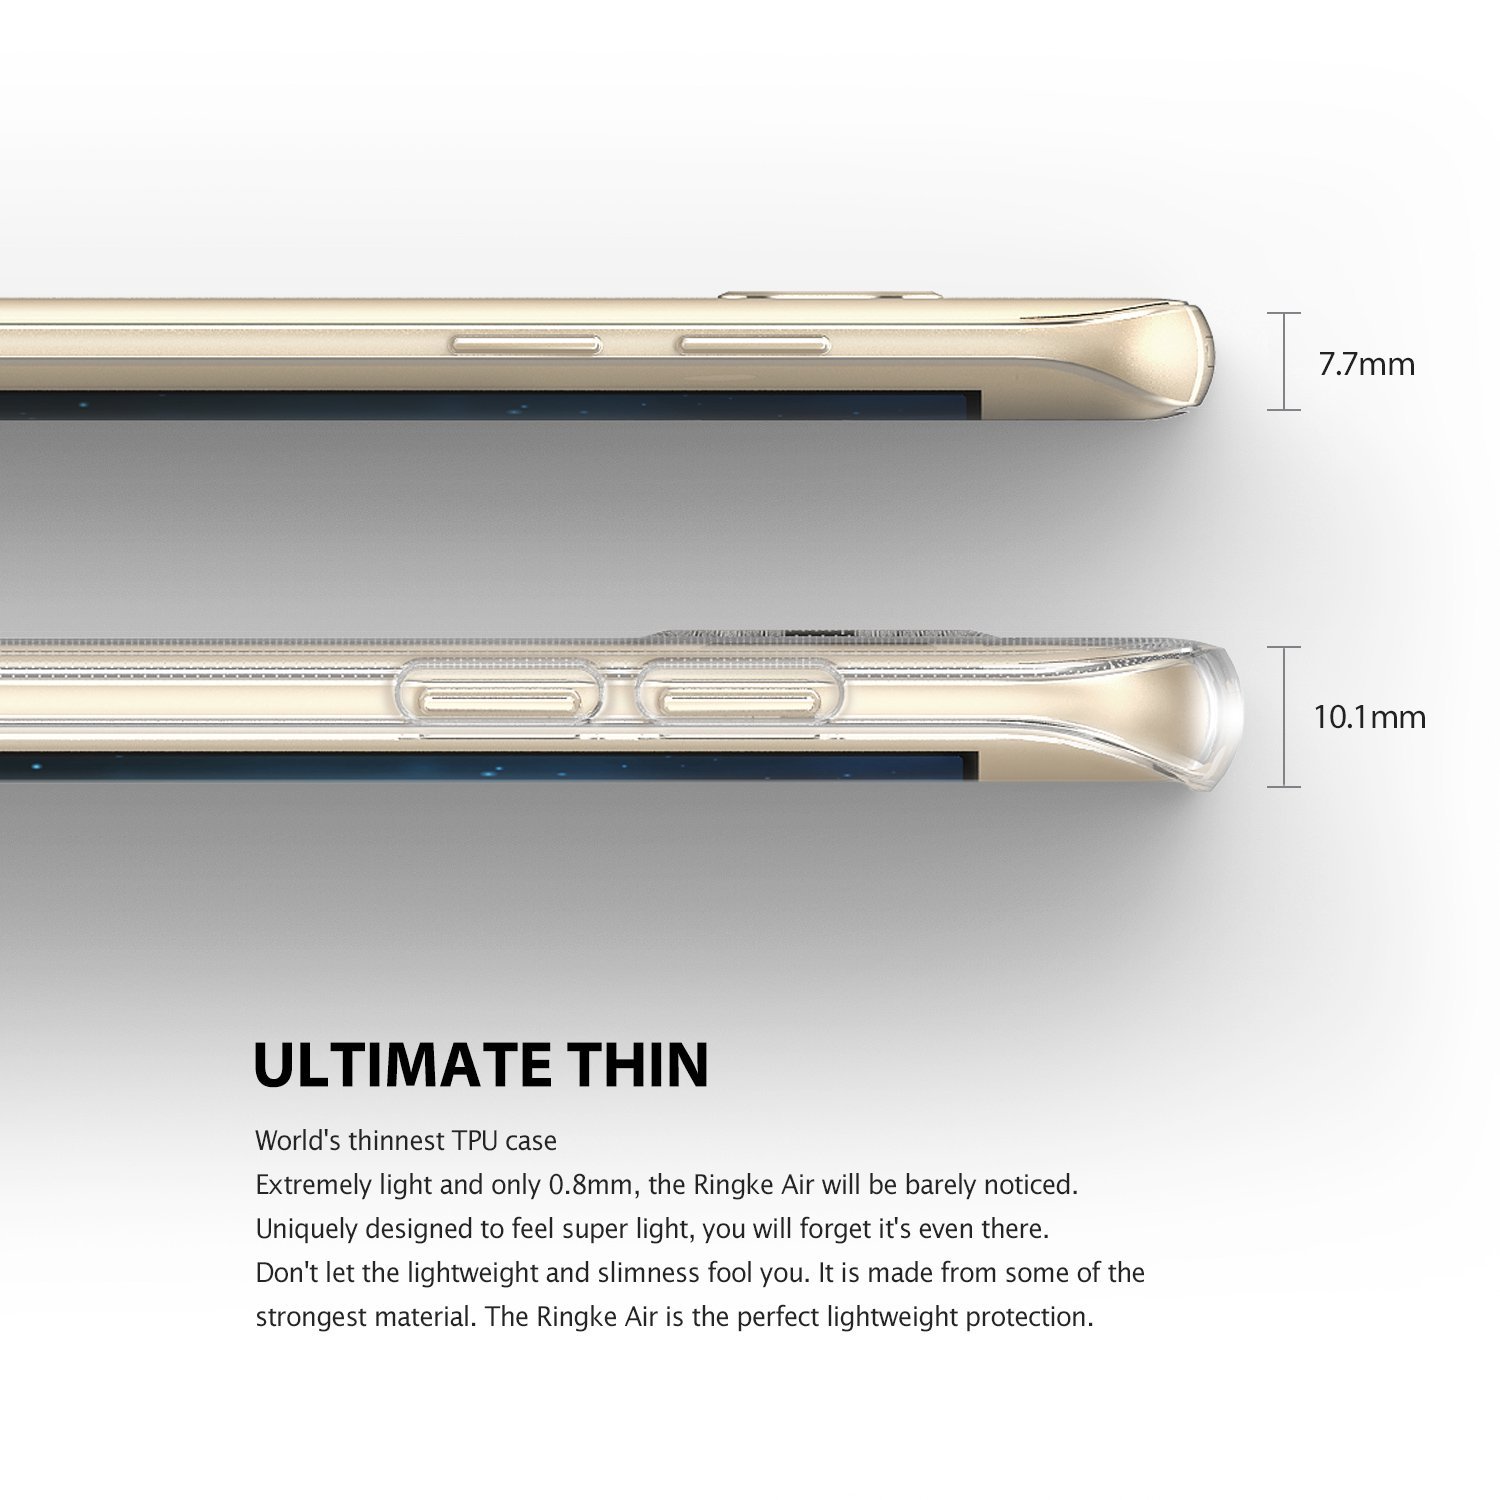 ULTIMATE THIN